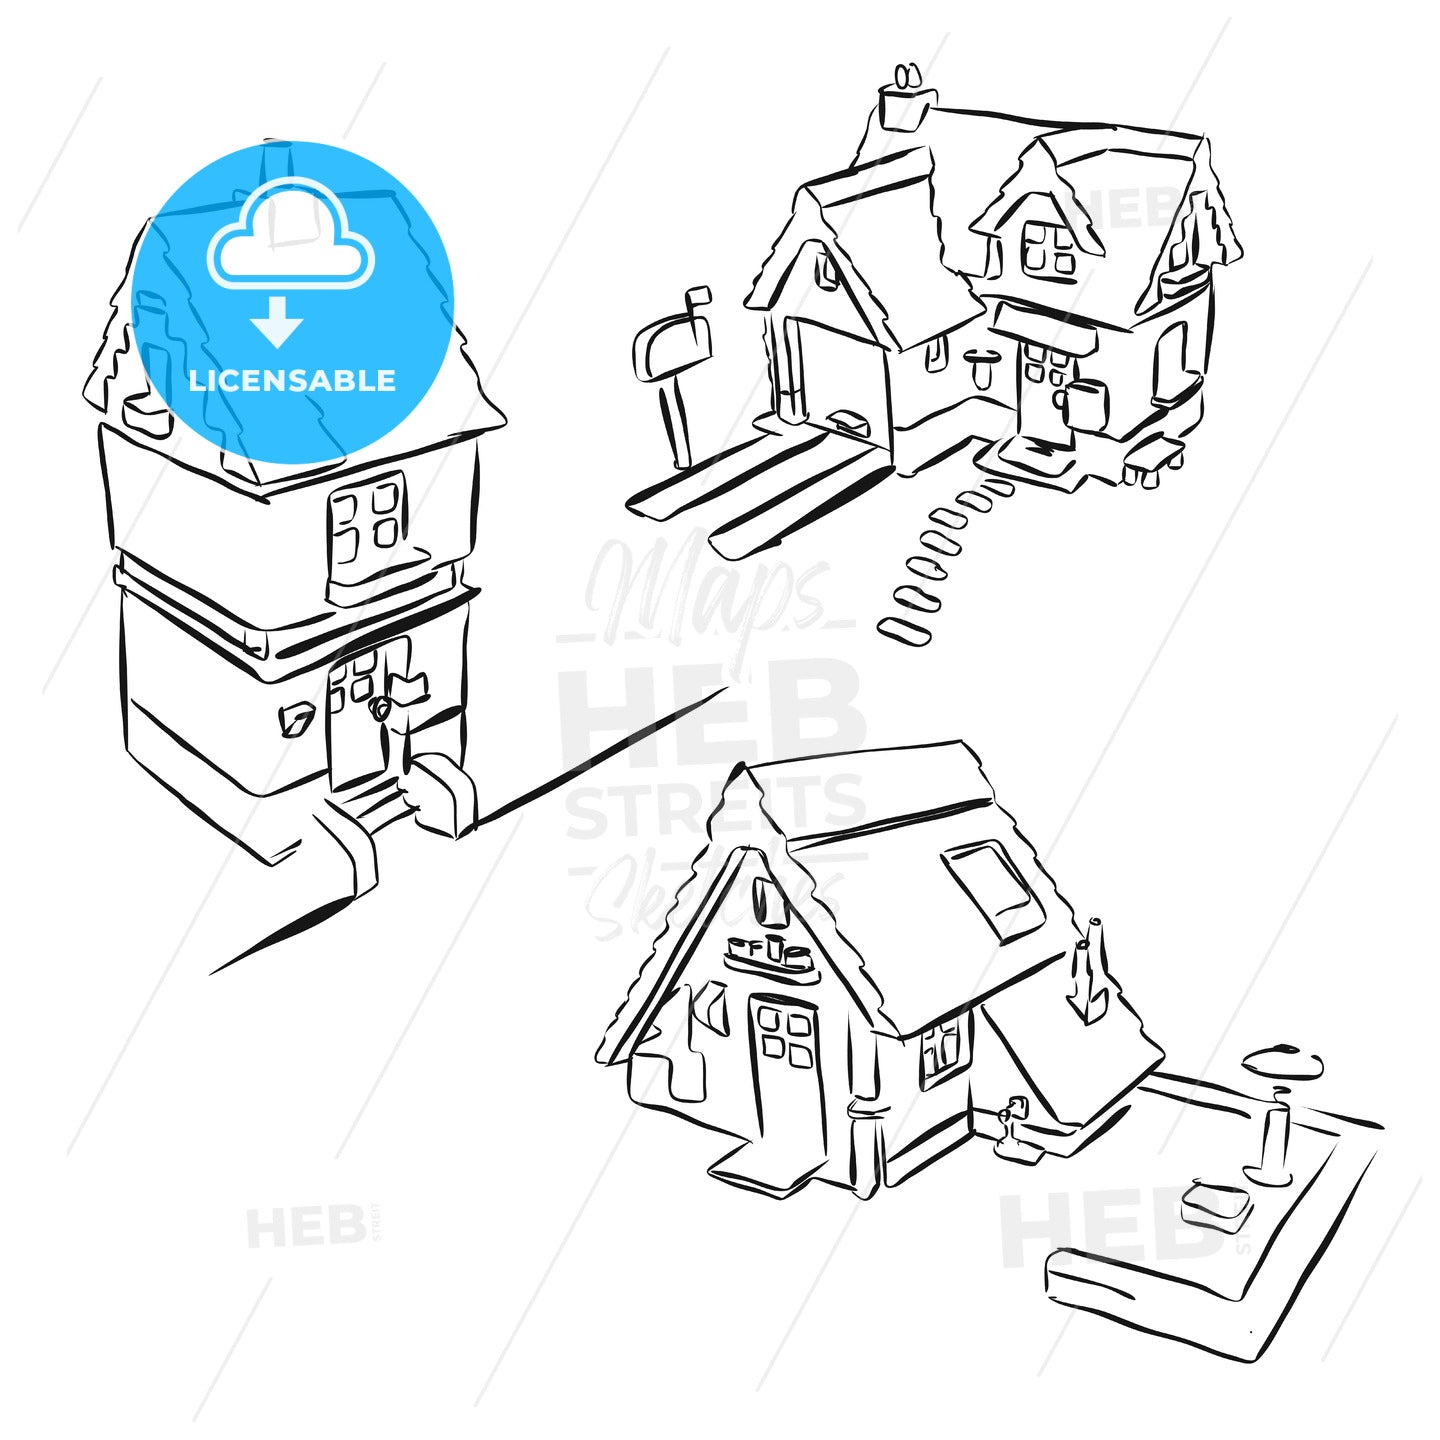 Three Houses Sketch Miniature Doodles – instant download